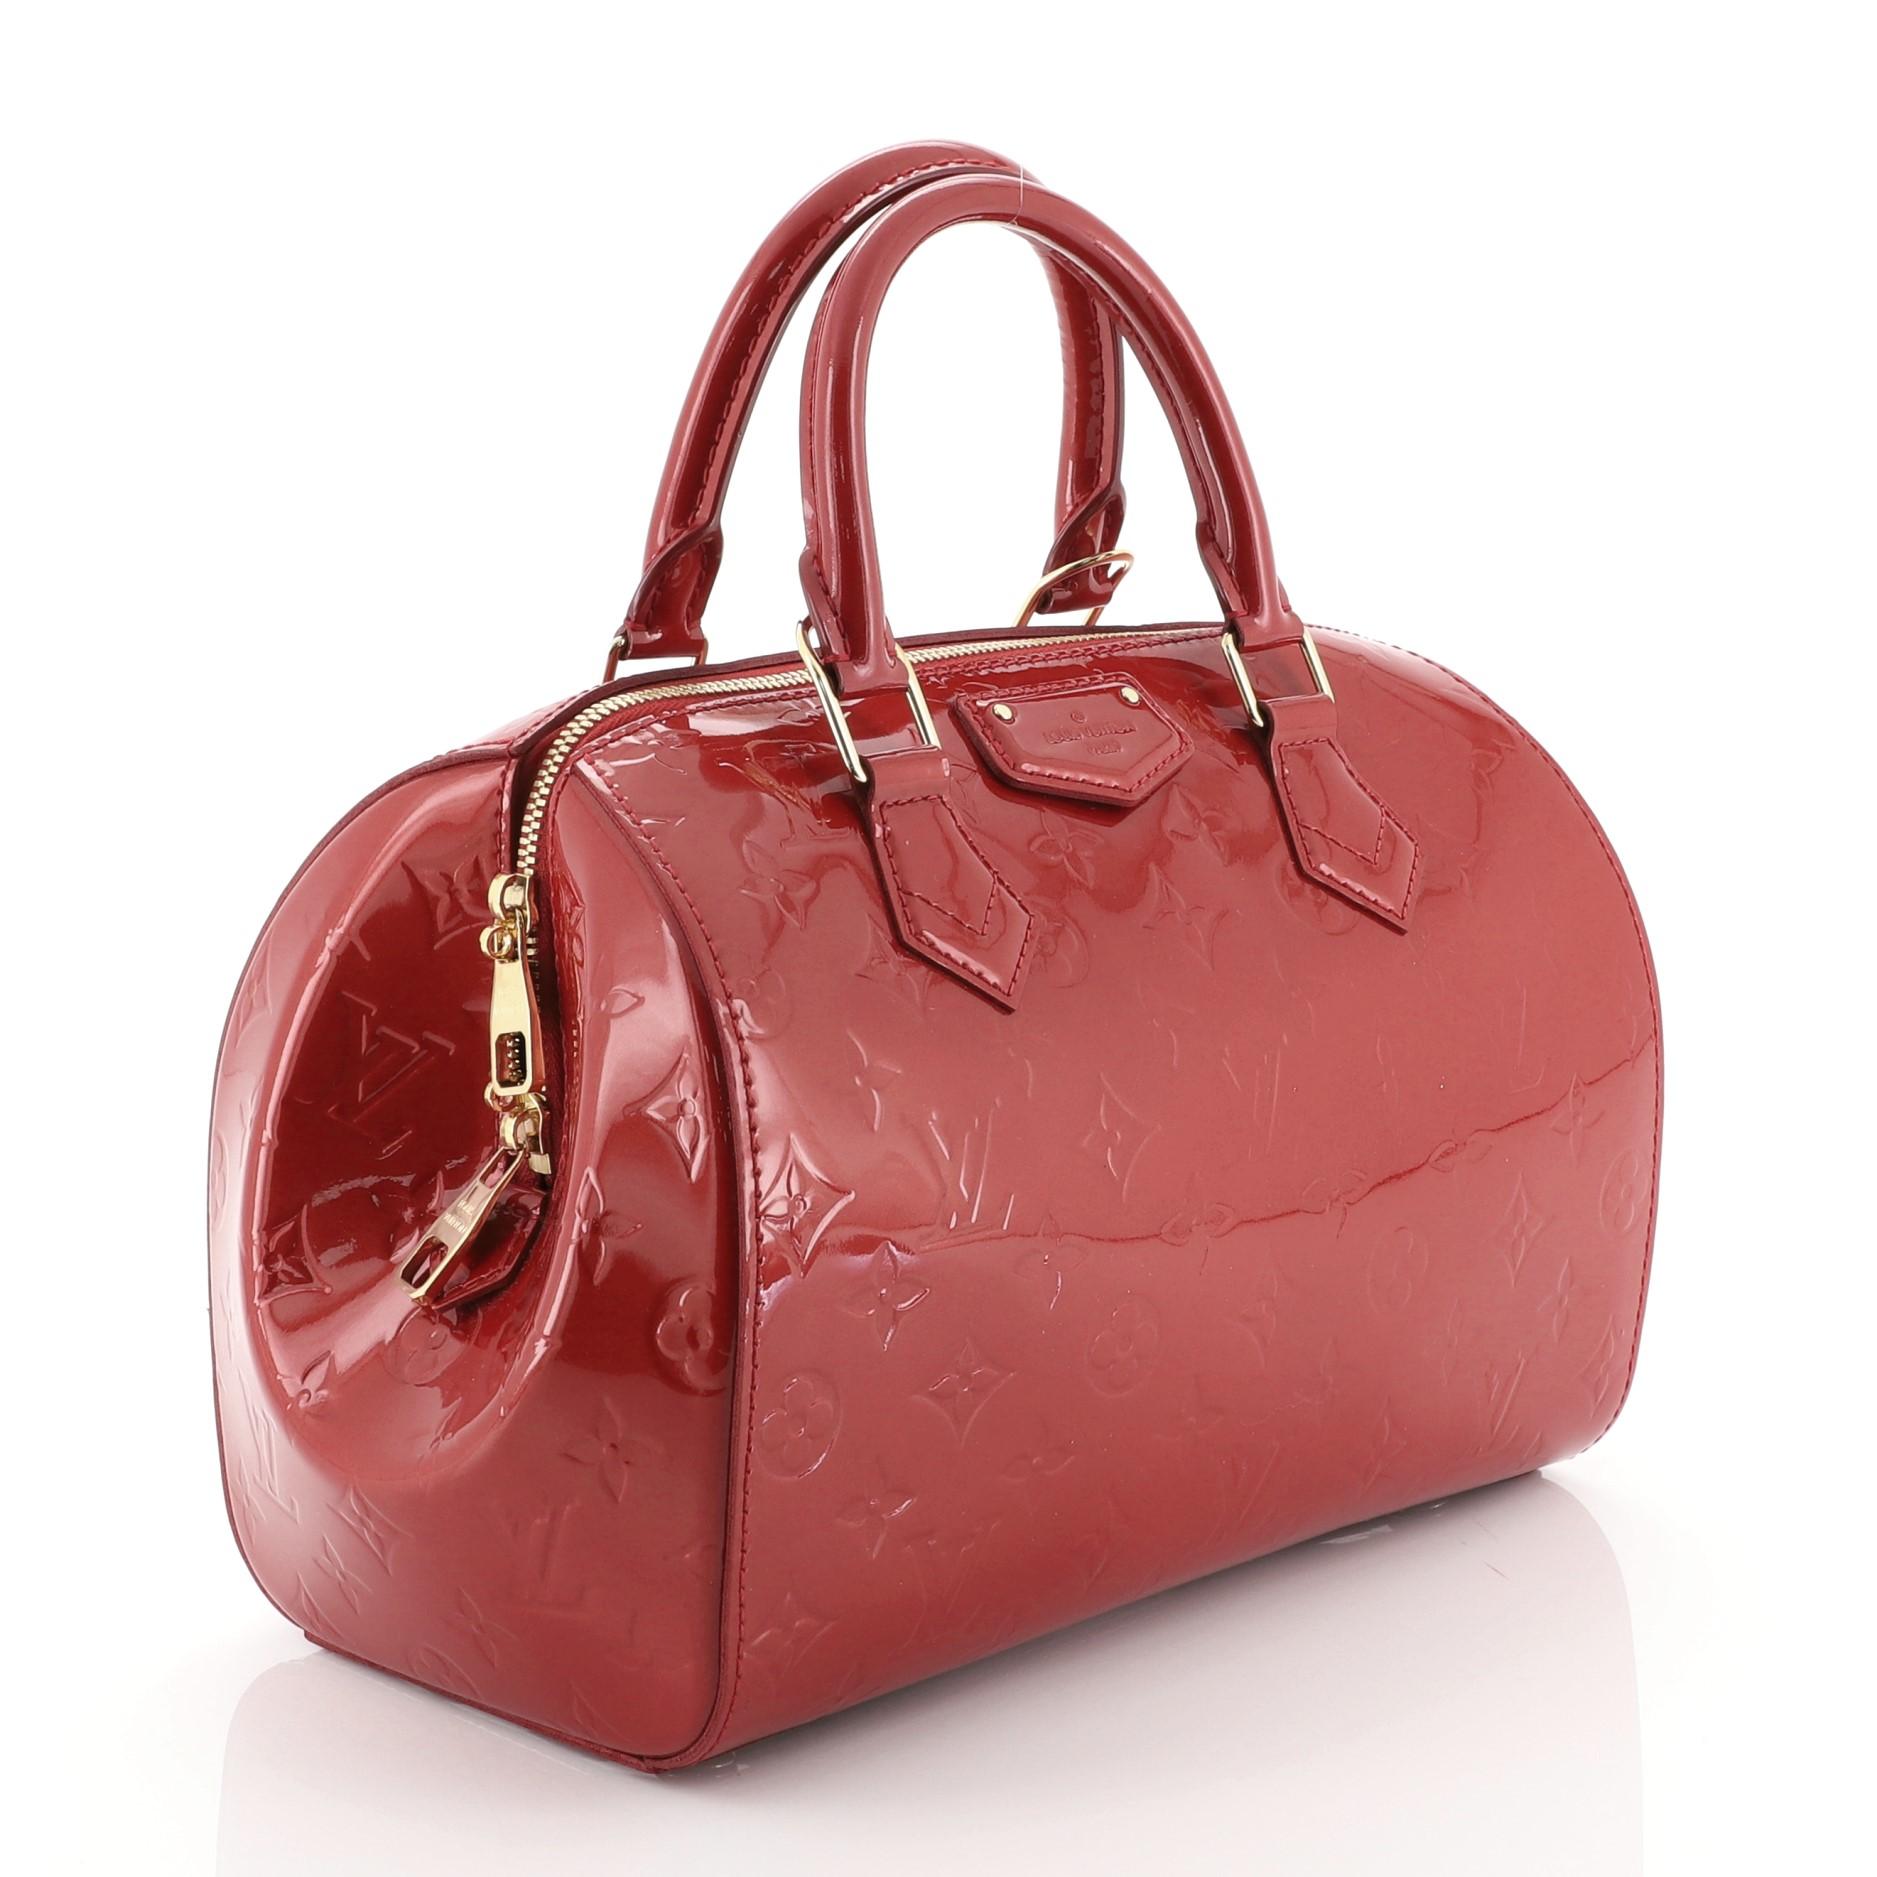 This Louis Vuitton Montana Handbag Monogram Vernis, crafted in red monogram vernis leather, features dual rolled handles, protective base studs and gold-tone hardware. Its zip closure opens to a red fabric interior with slip pocket. Authenticity